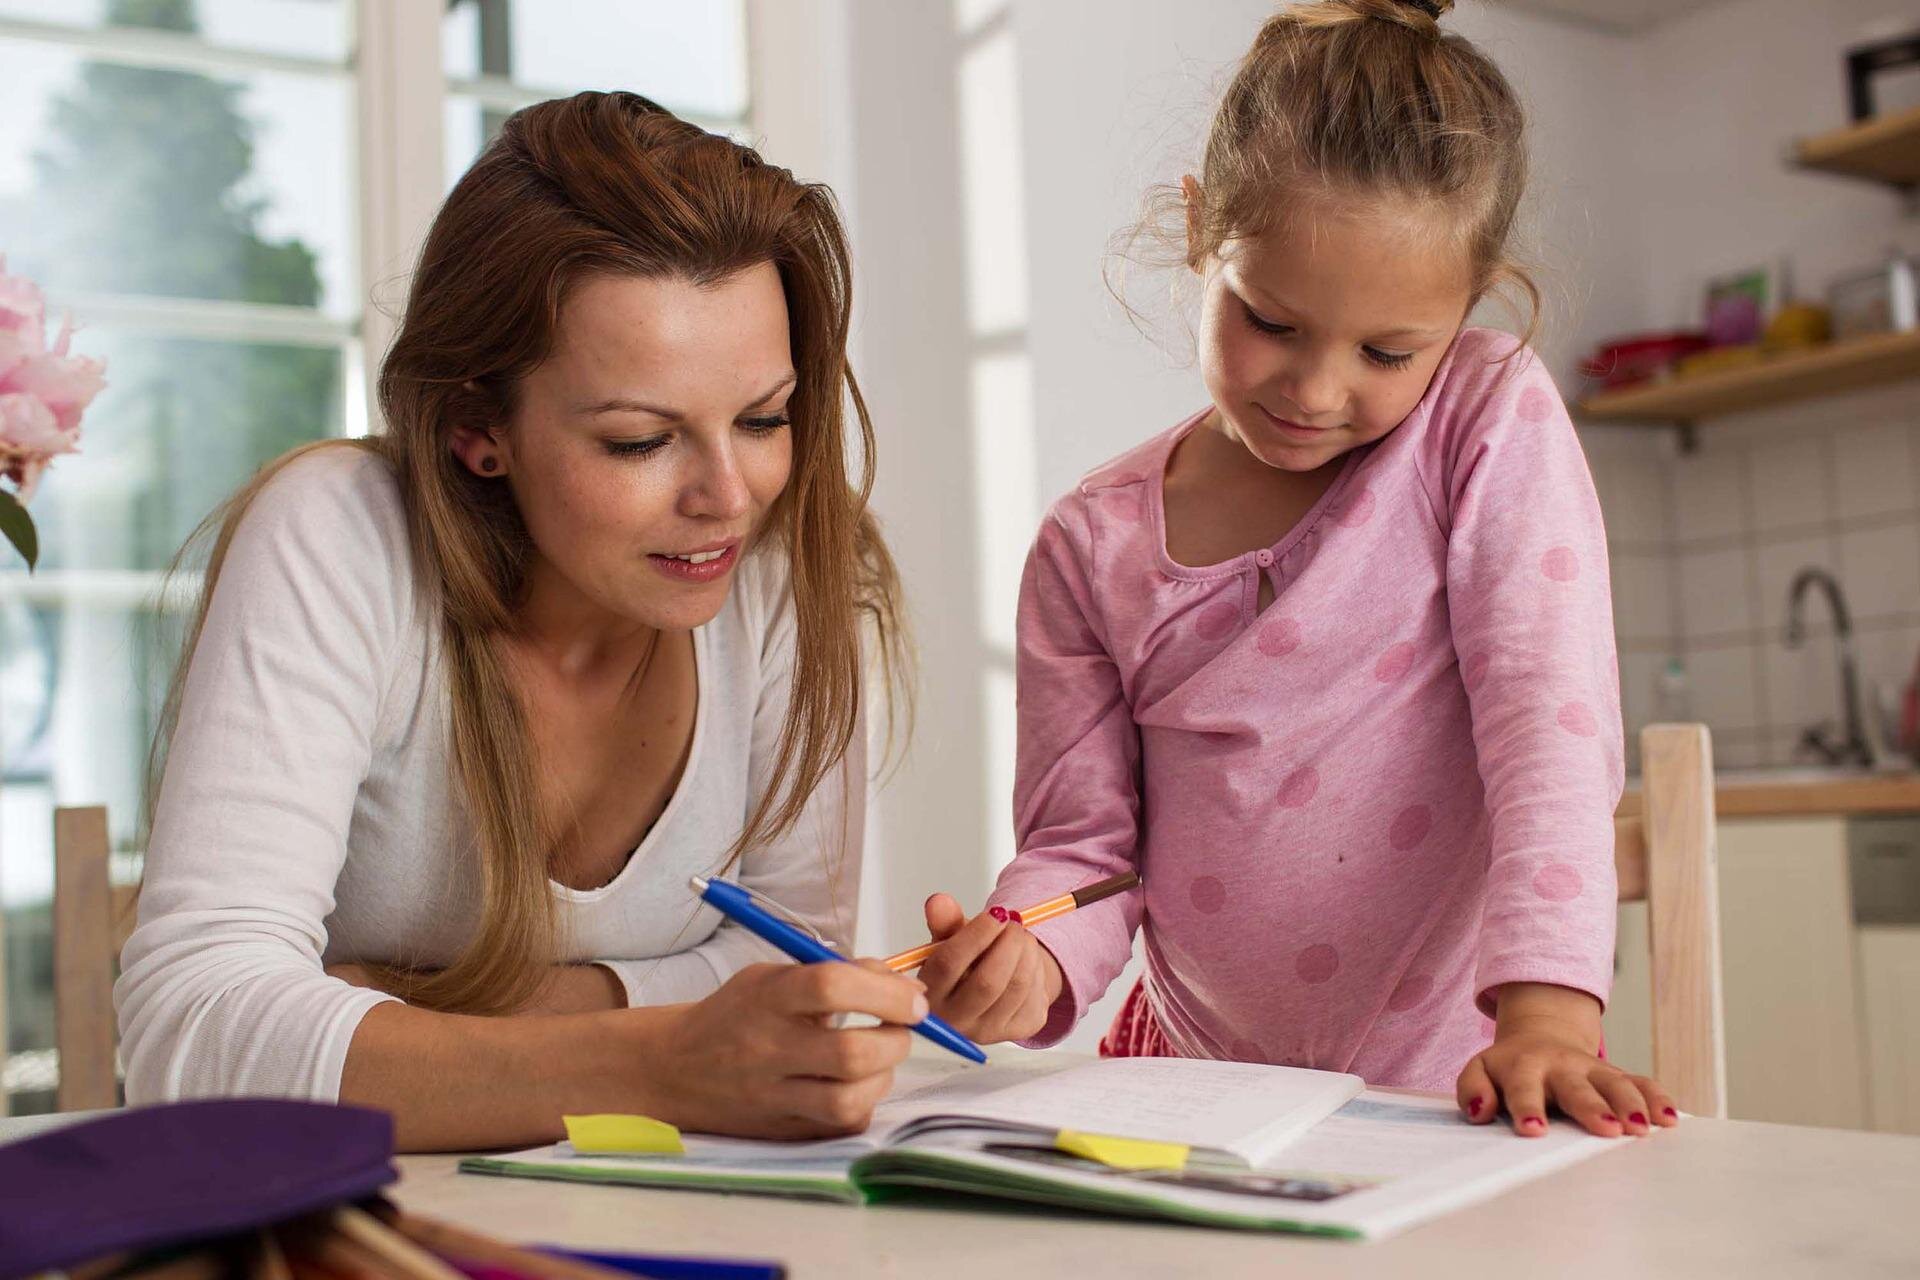 Study finds parental help with homework has no impact on student achievement